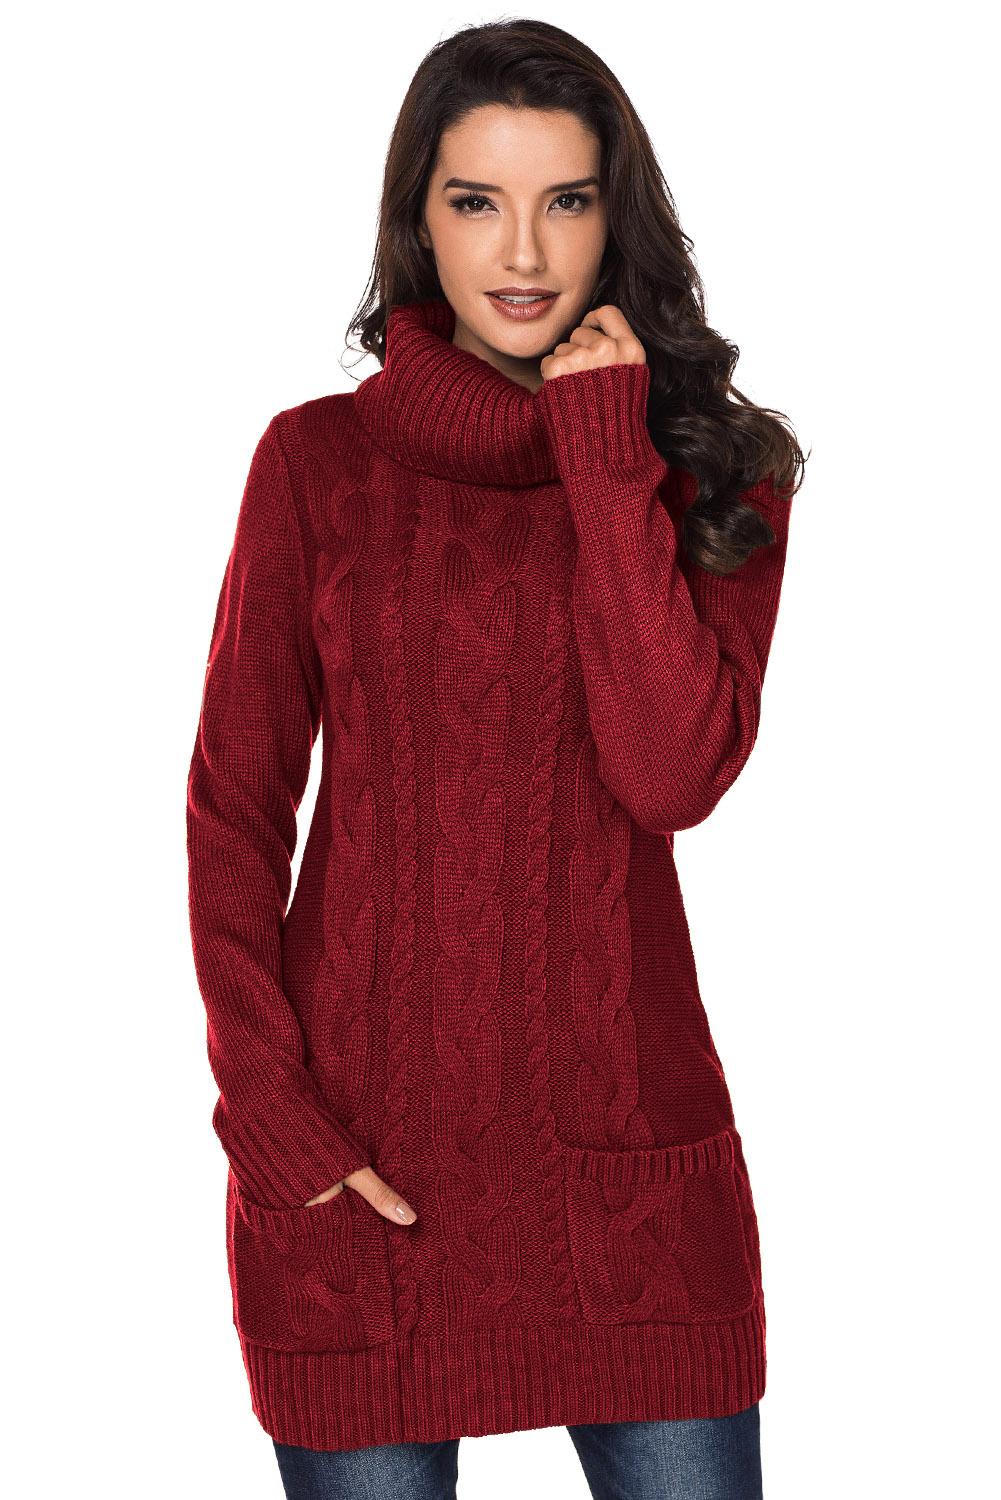 $ 30.63 - Red Cowl Neck Cable Knit Sweater Dress - www.blencot.net